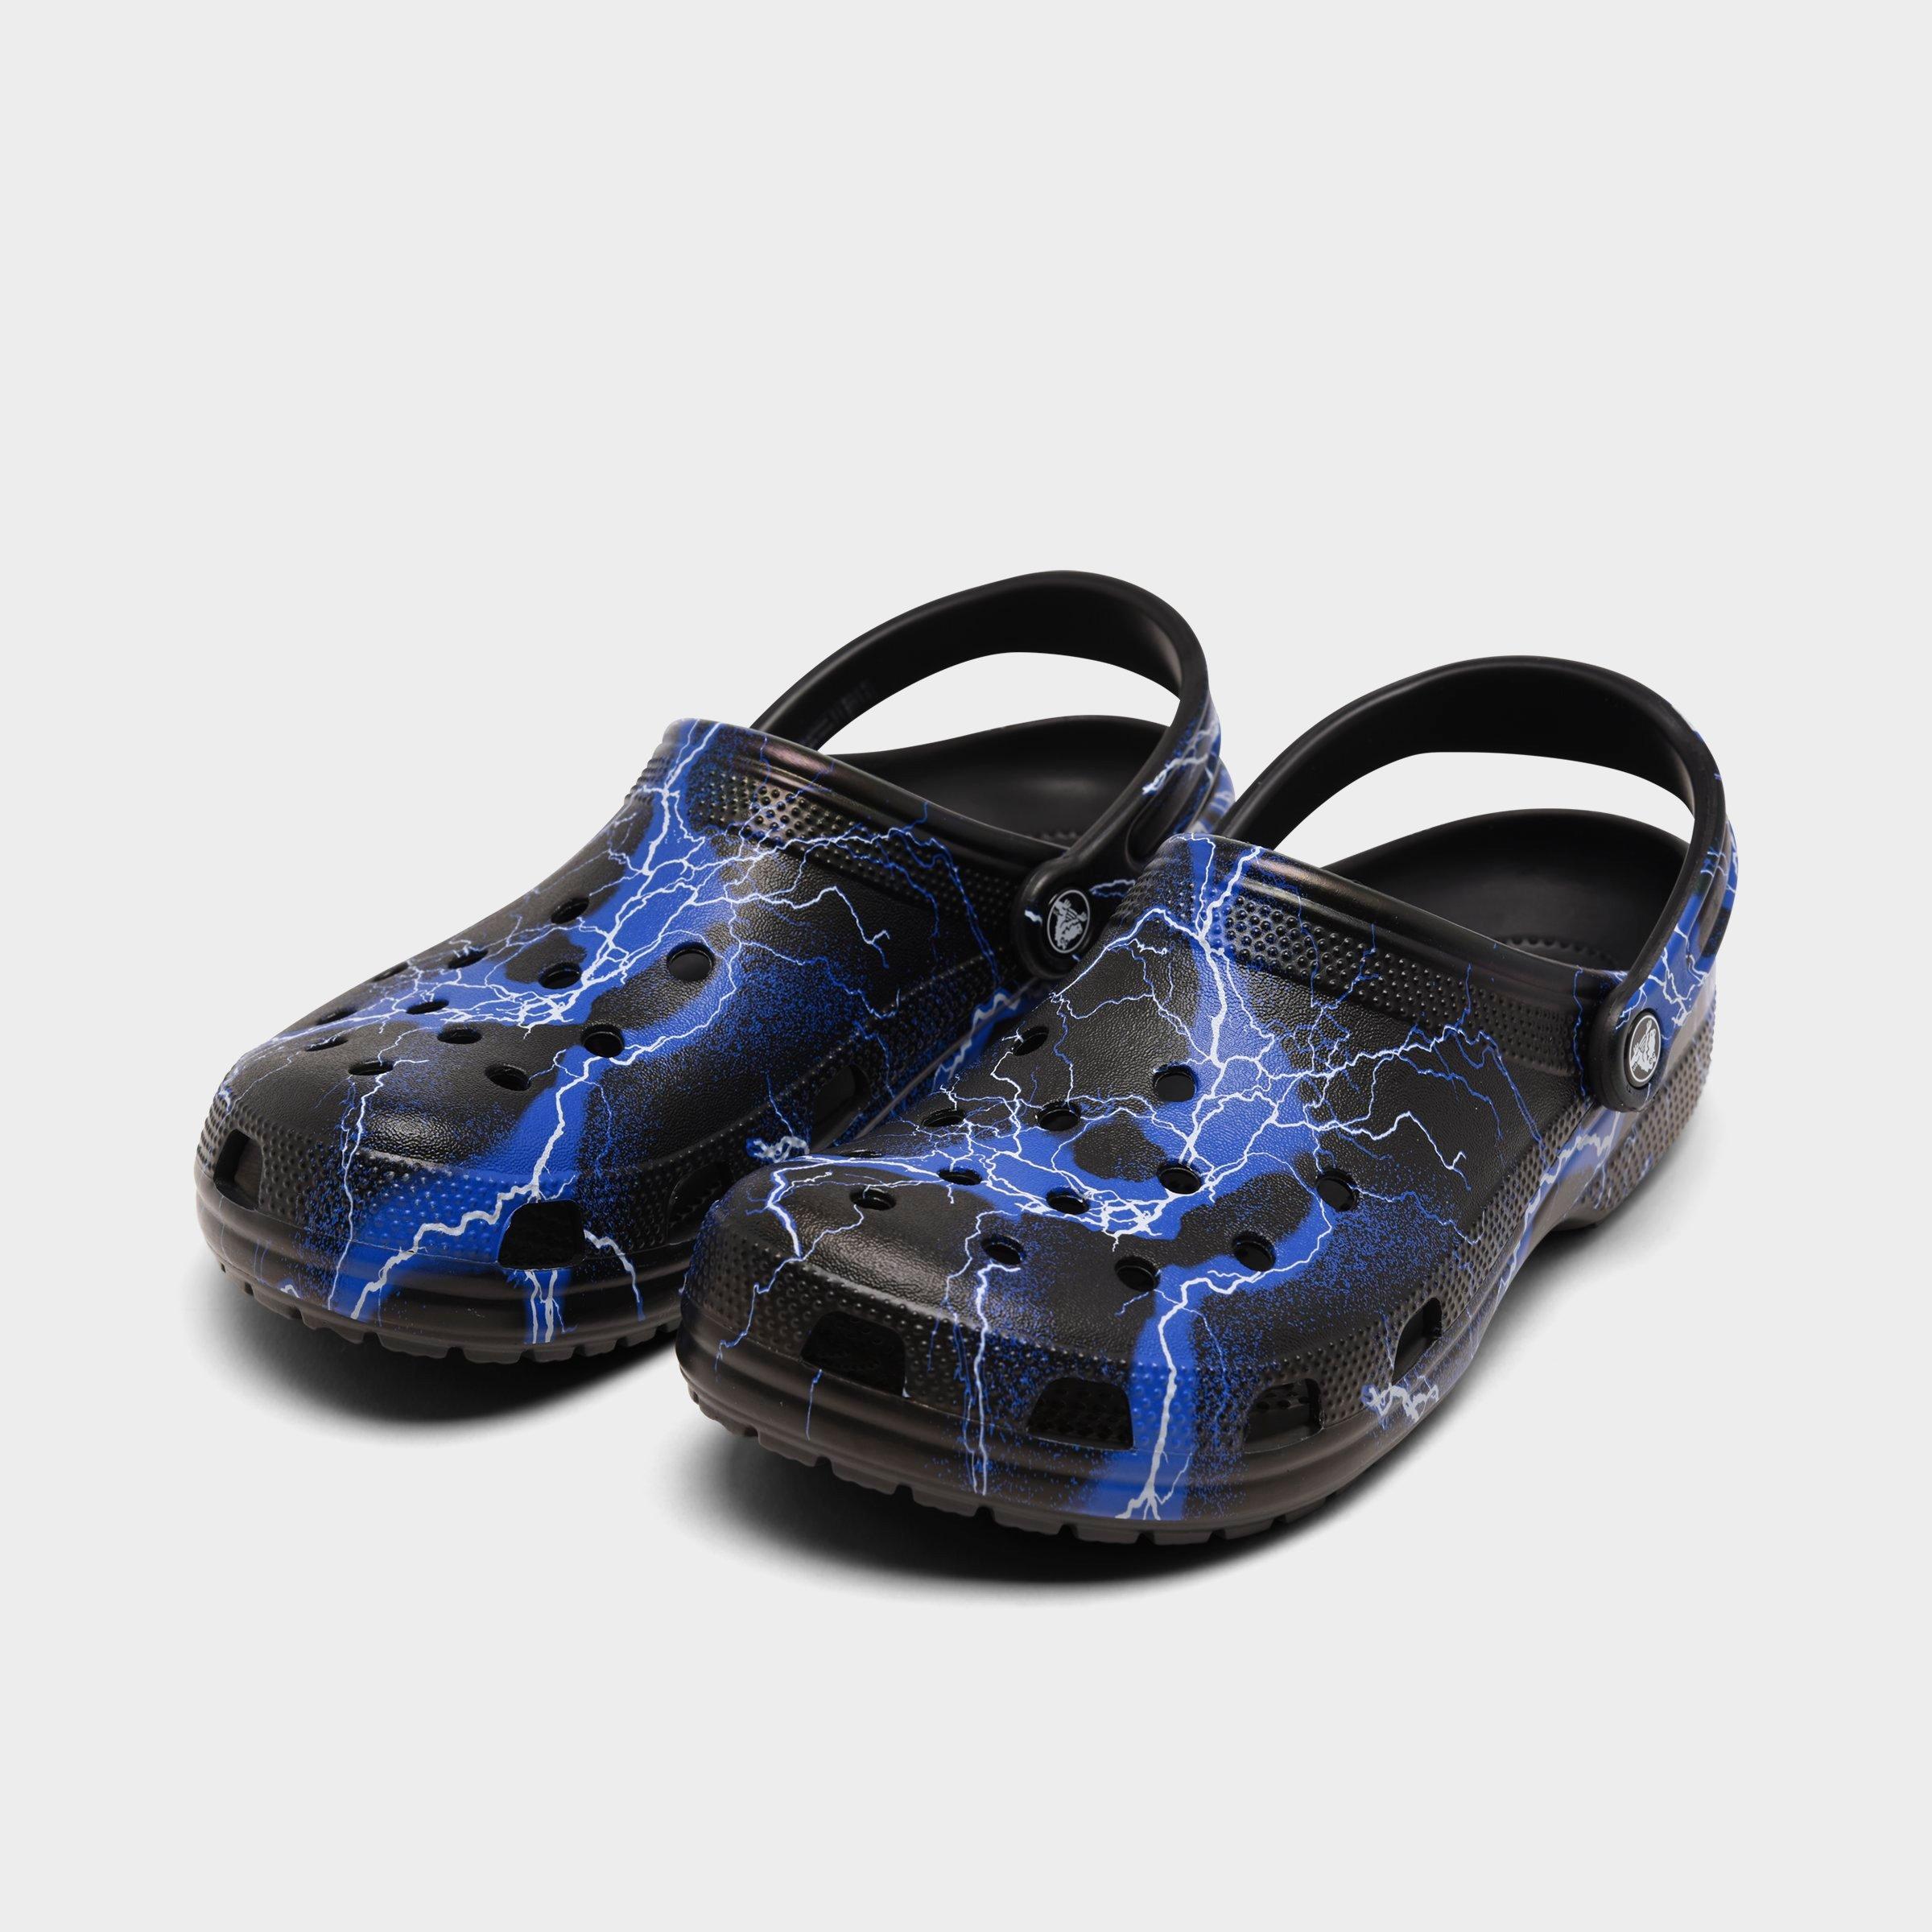 classic out of this world crocs